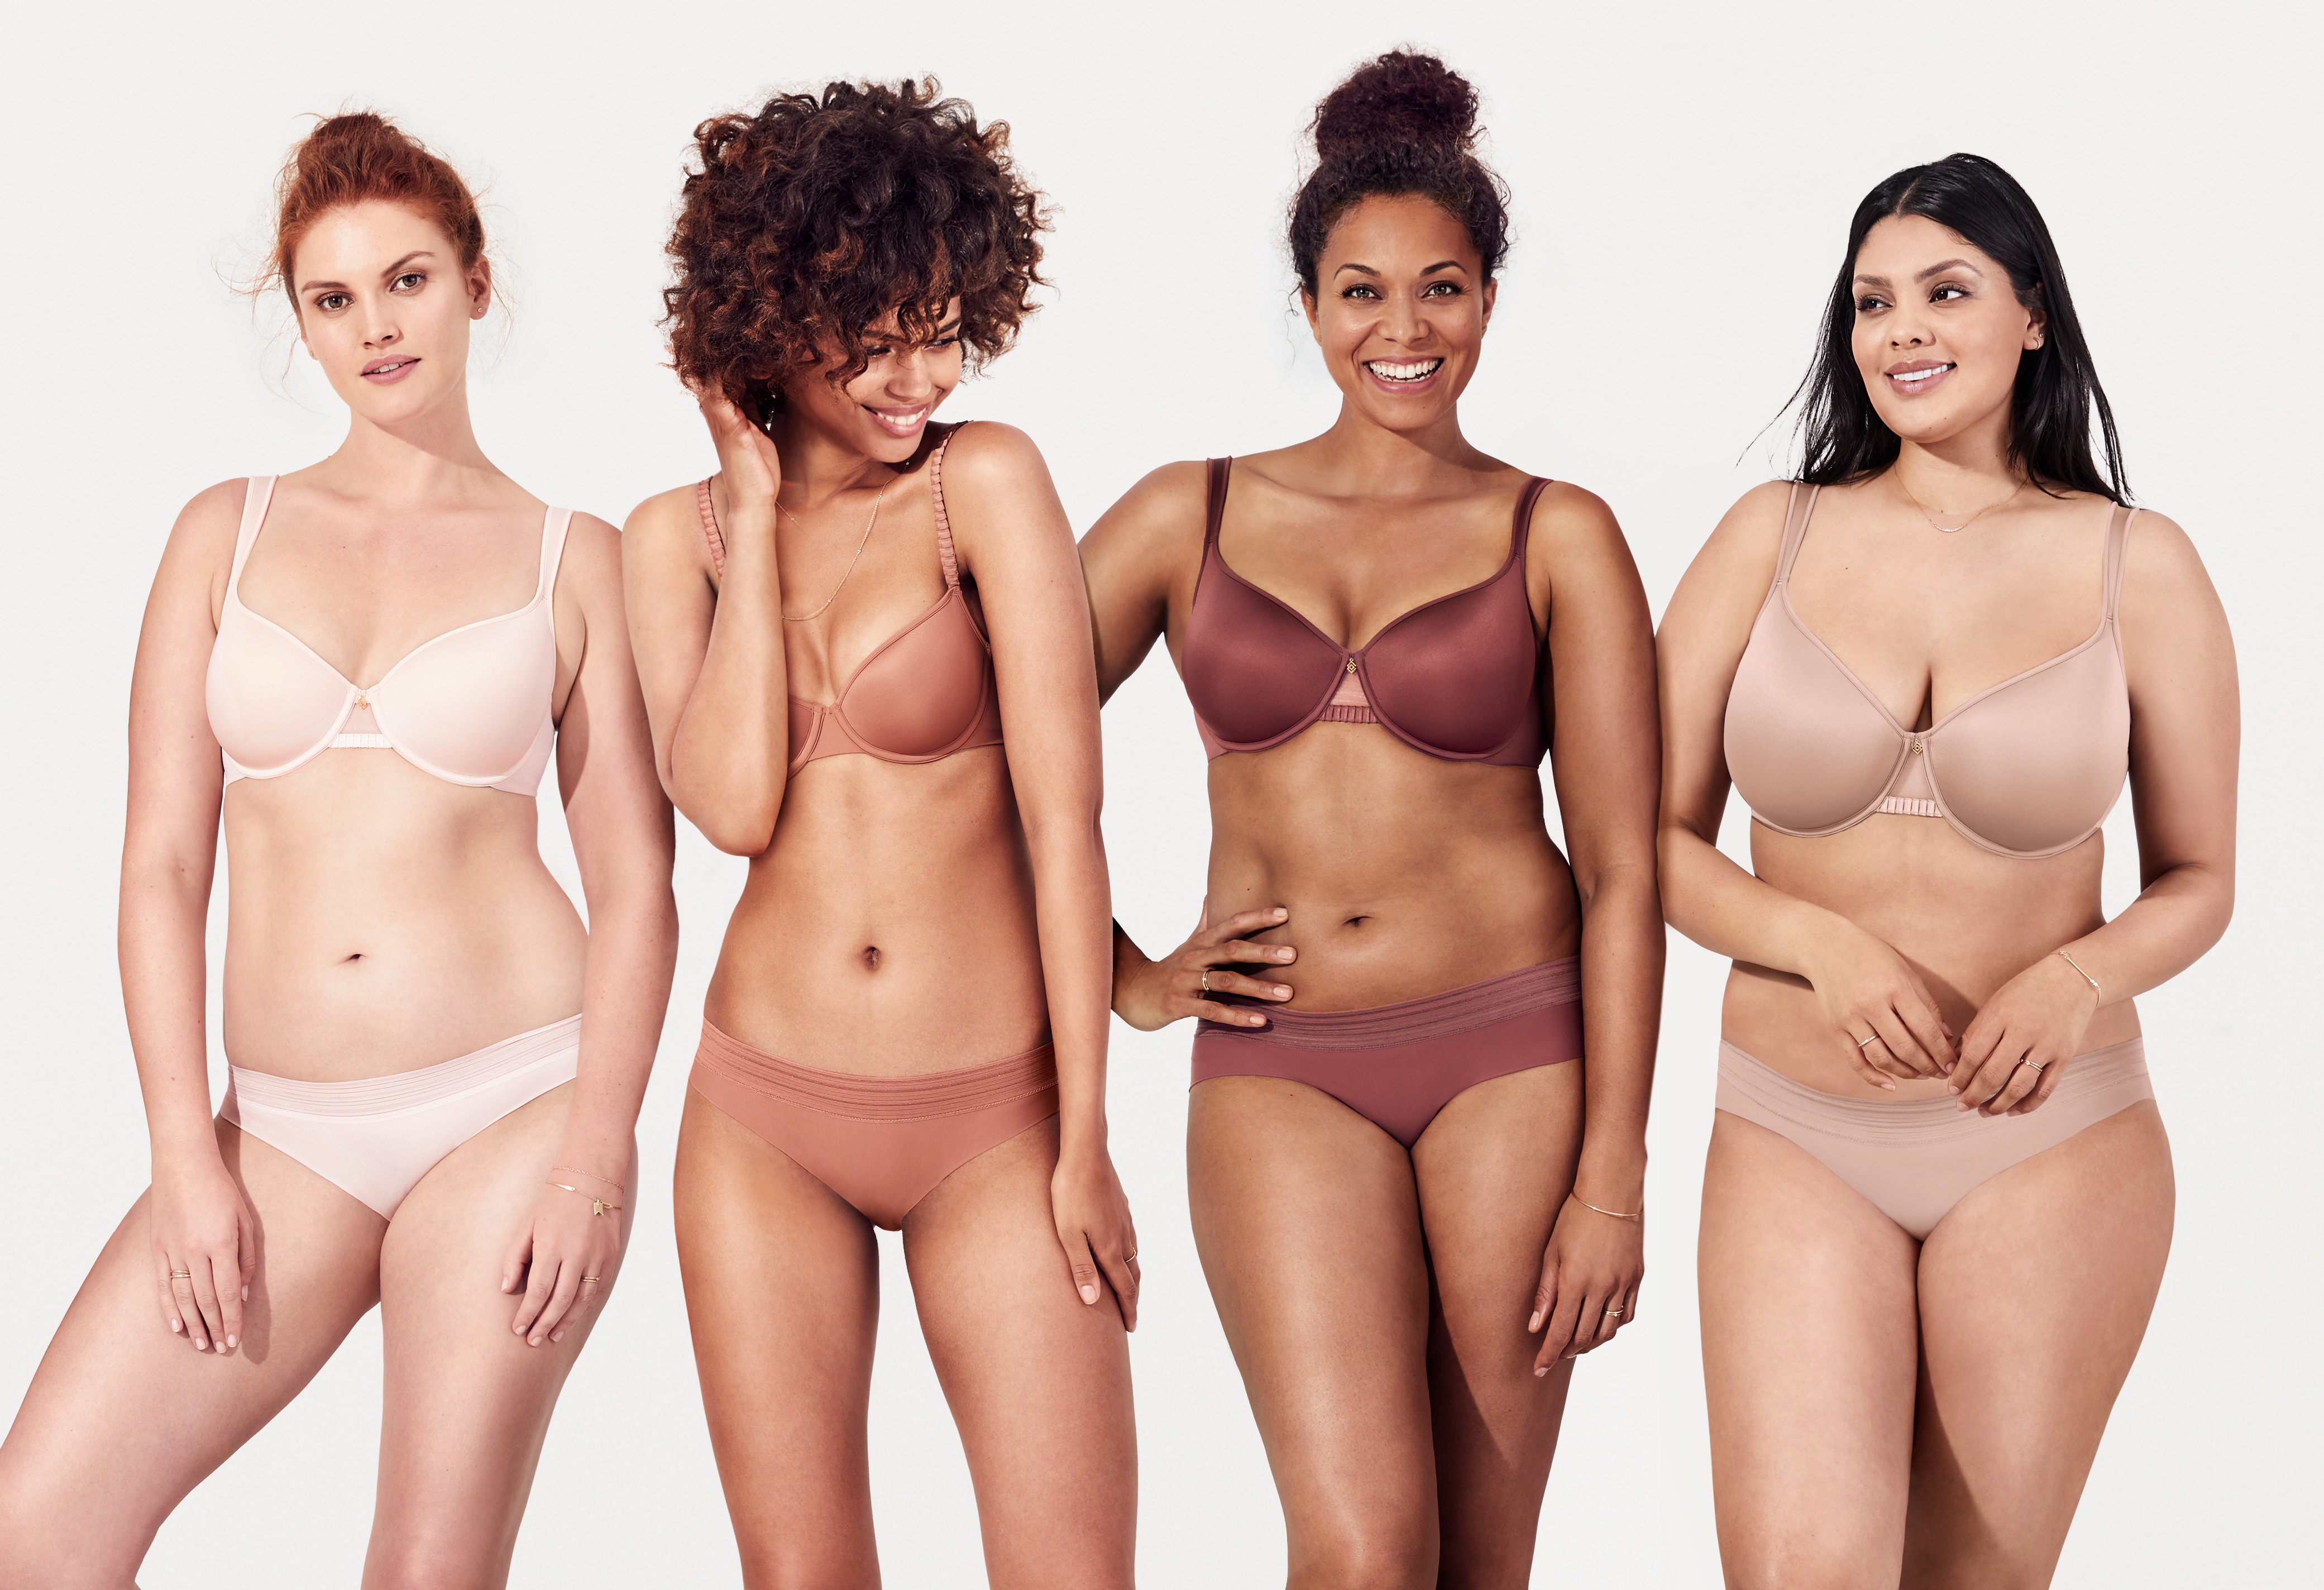 Women's LOVE AND FIT Plus Sized Lingerie